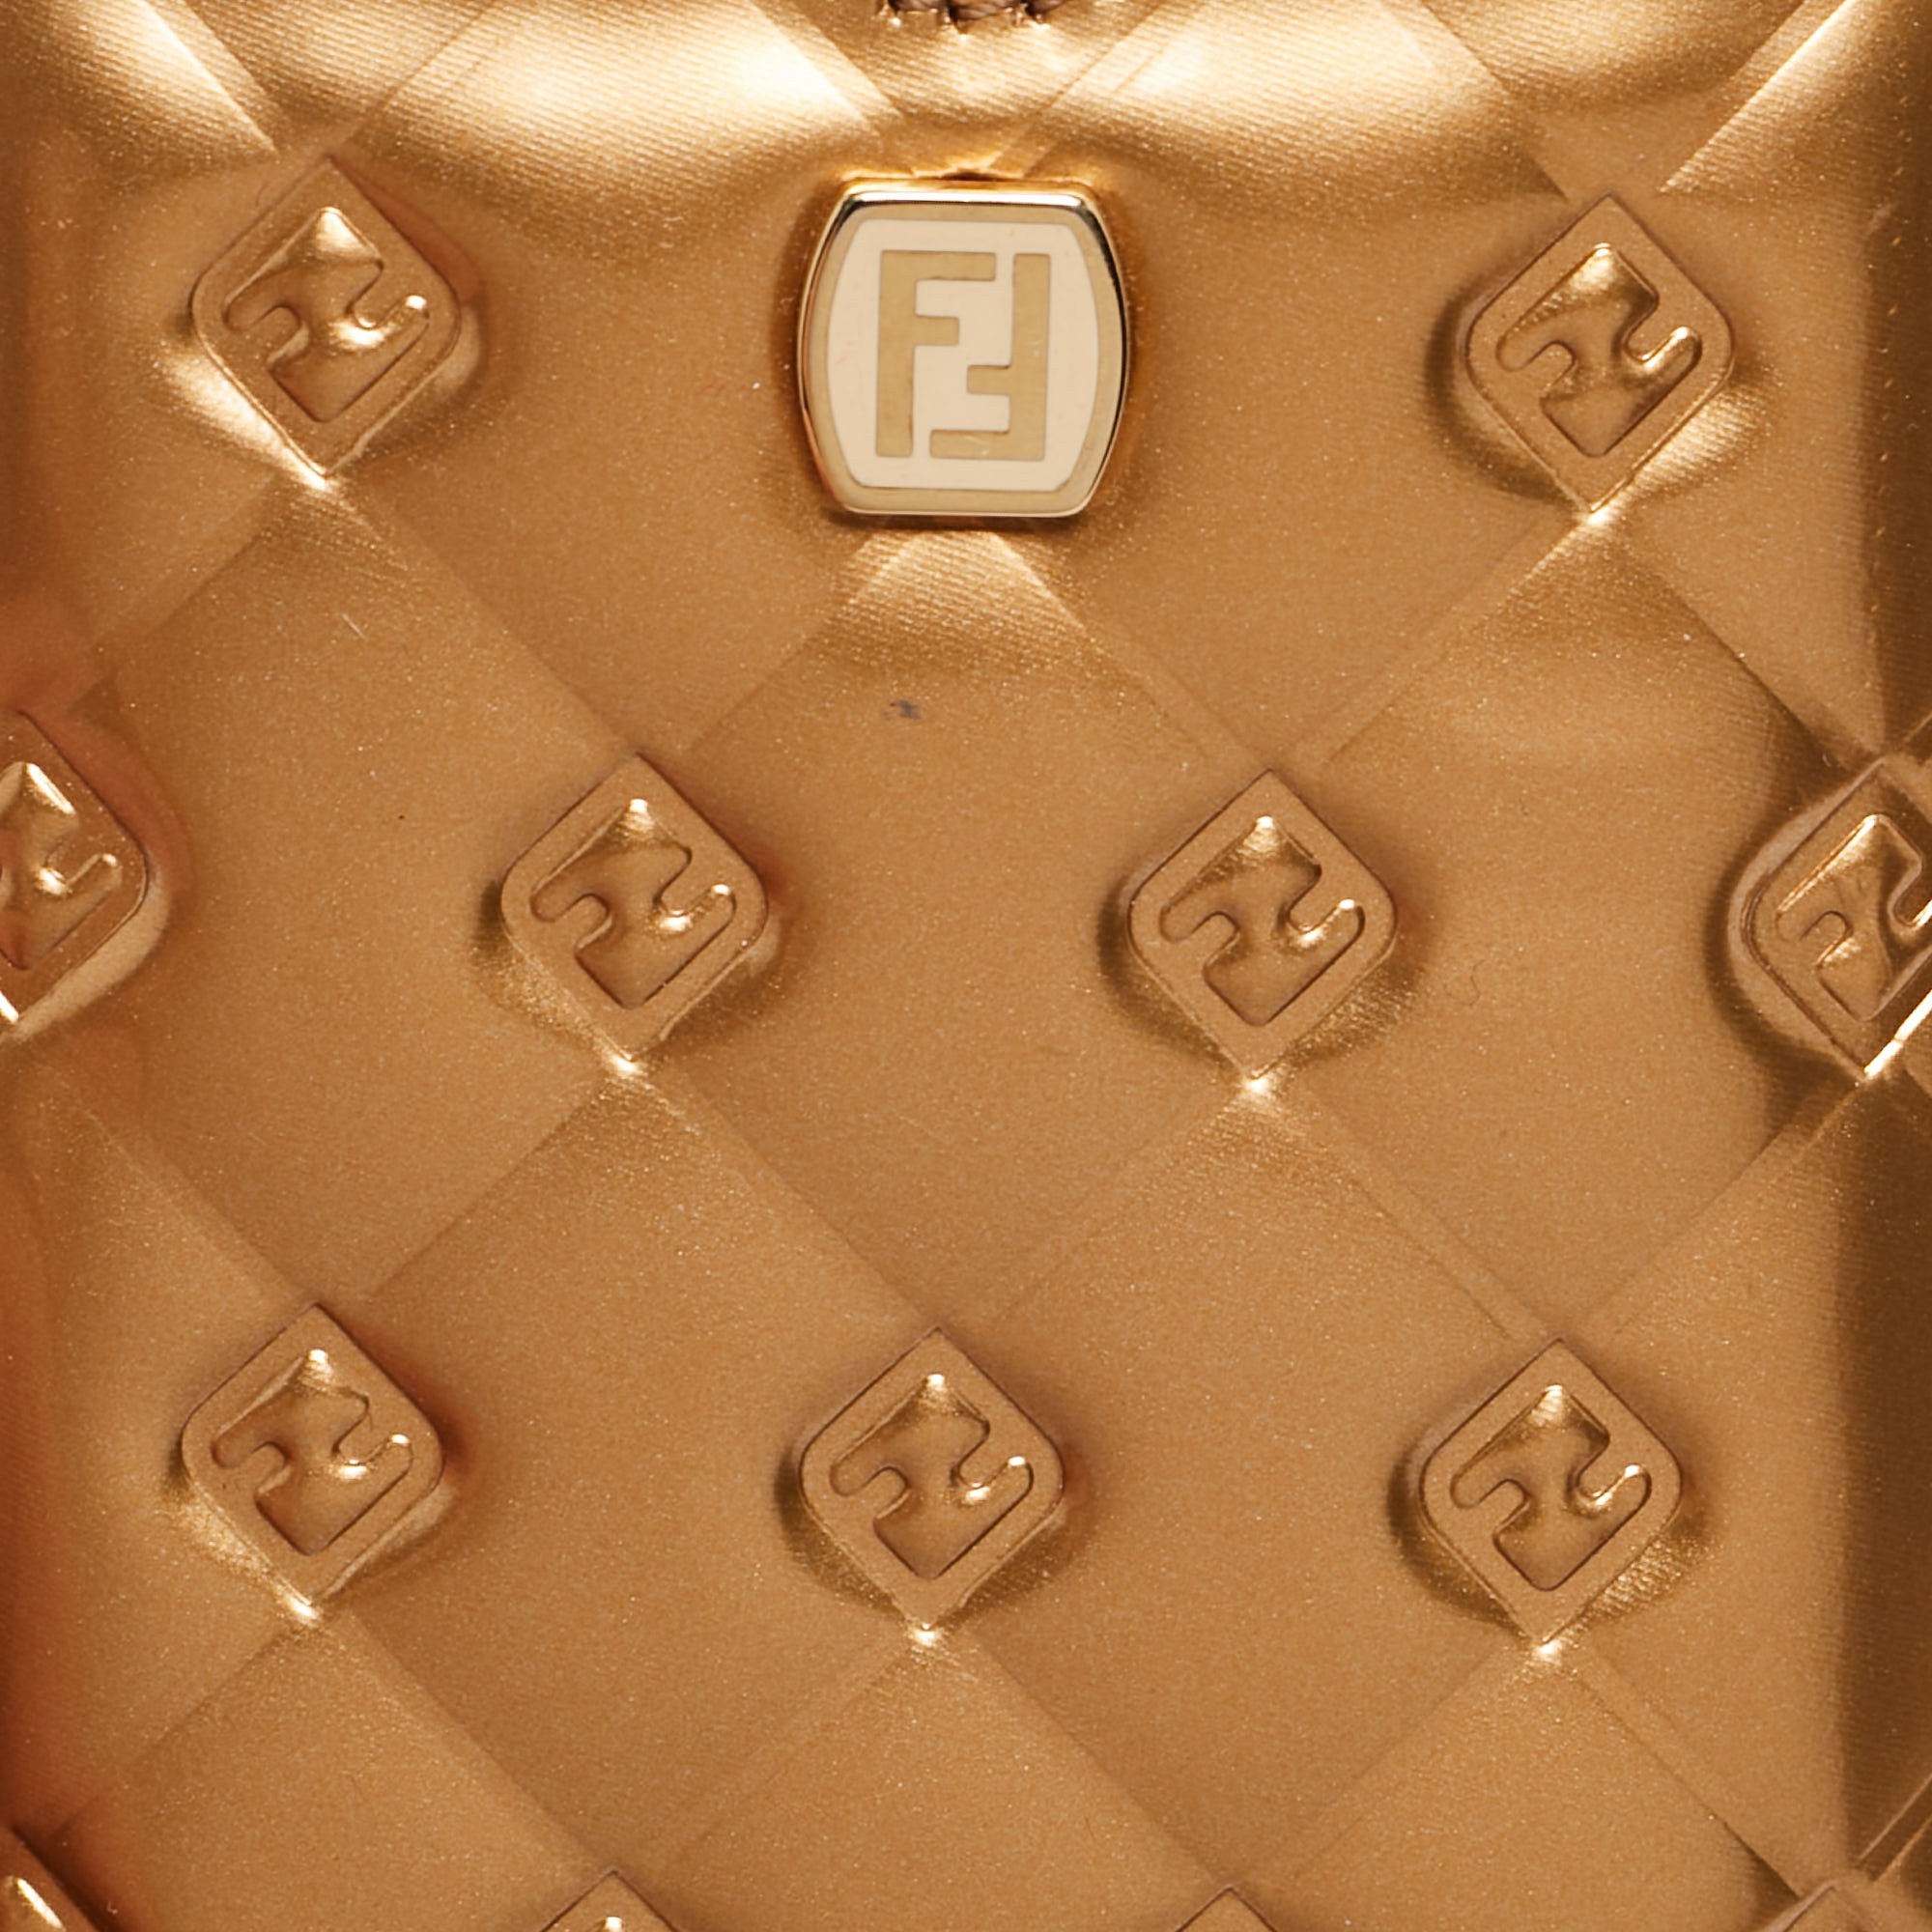 Fendi Gold Embossed Leather Fendilicious Phone Cover